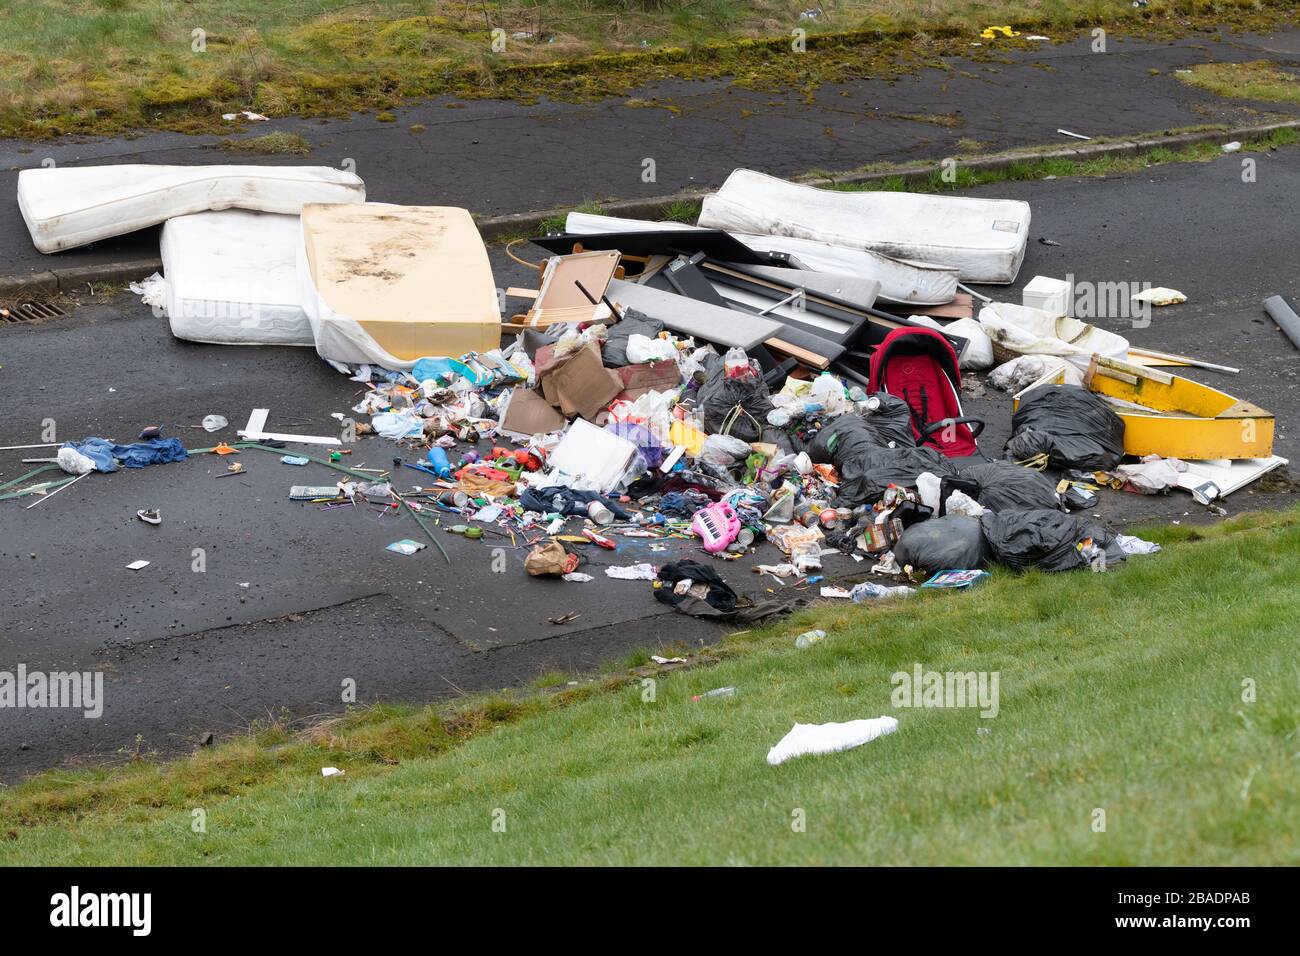 fly tipping uk - large pile of household rubbish including childrens toys and mattresses - Easterhouse, Glasgow, Scotland, UK Stock Photo